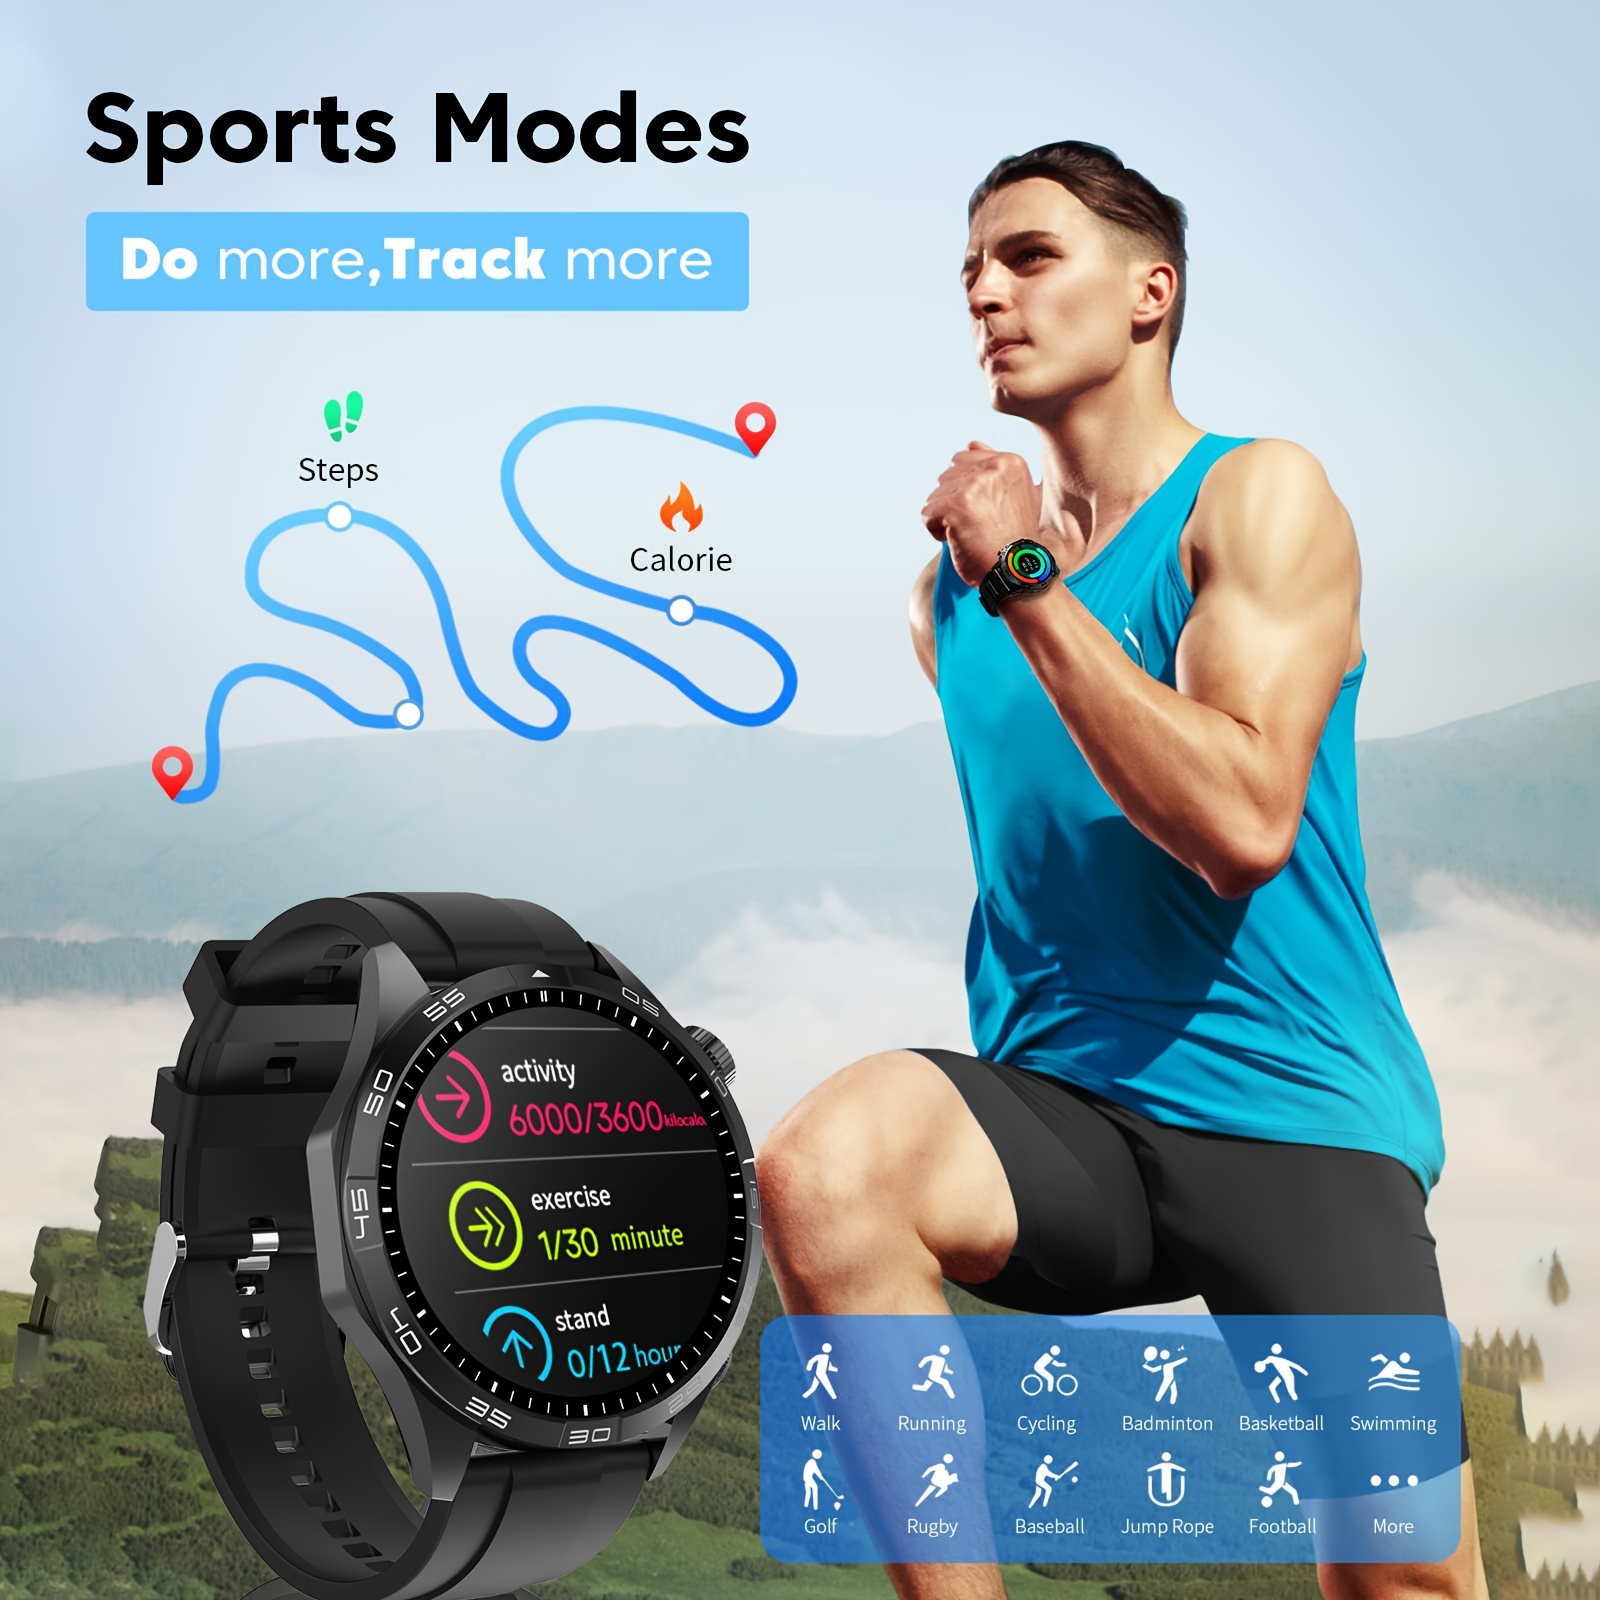 Smart Watch for Android/Samsung/iPhone, Activity Fitness Tracker